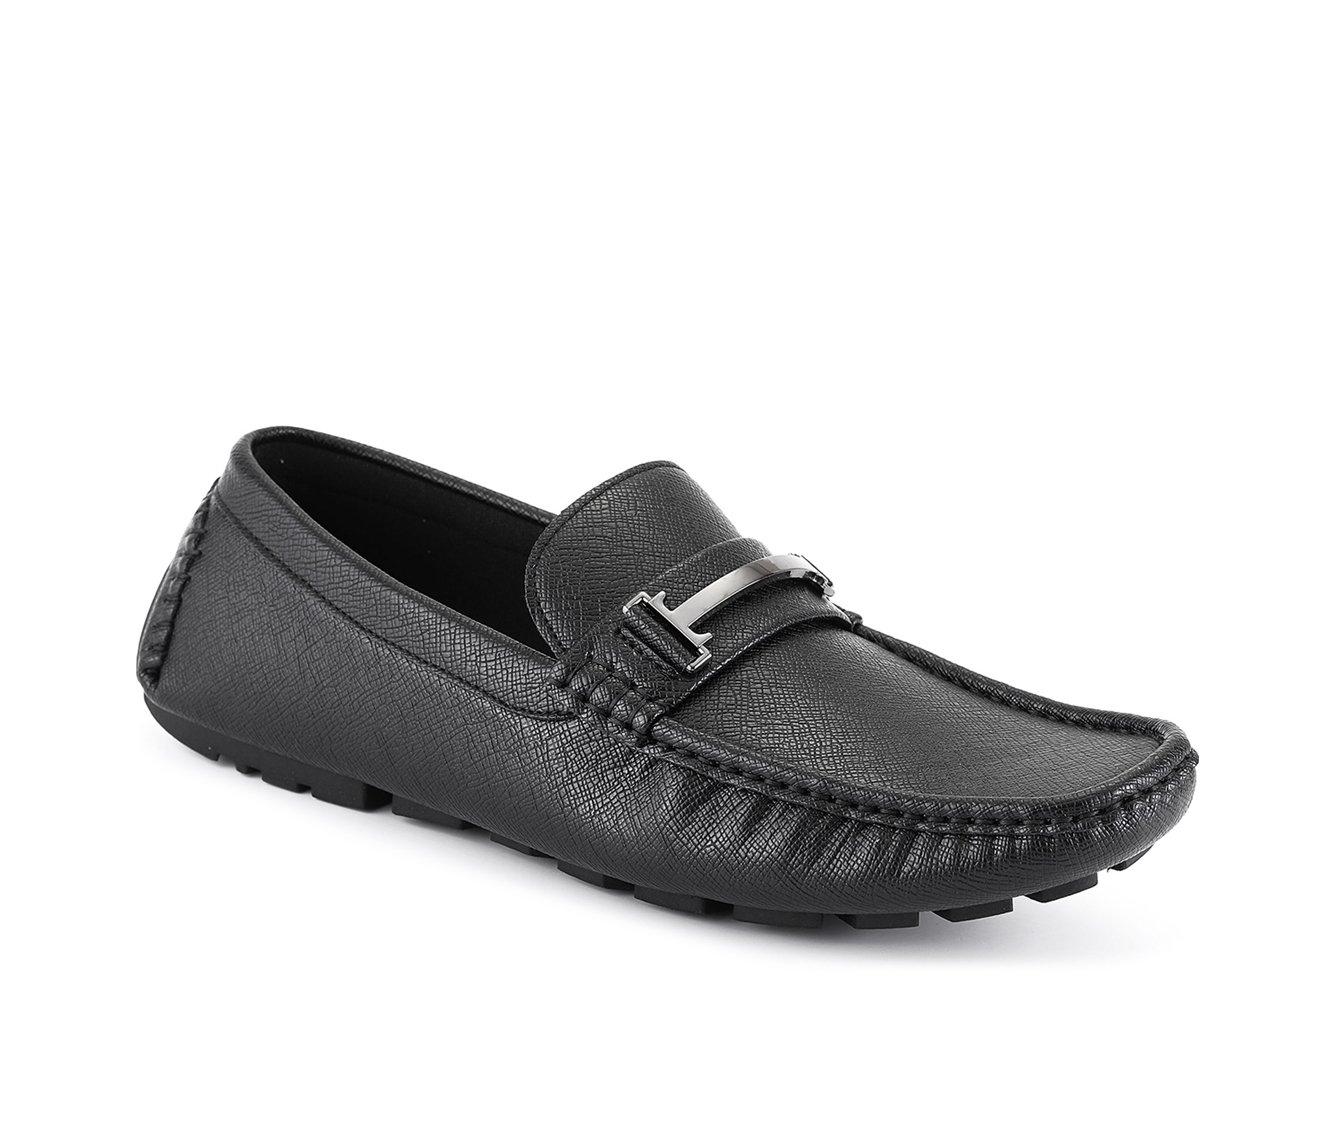 Tommy Hilfiger Acento Loafers Carnival